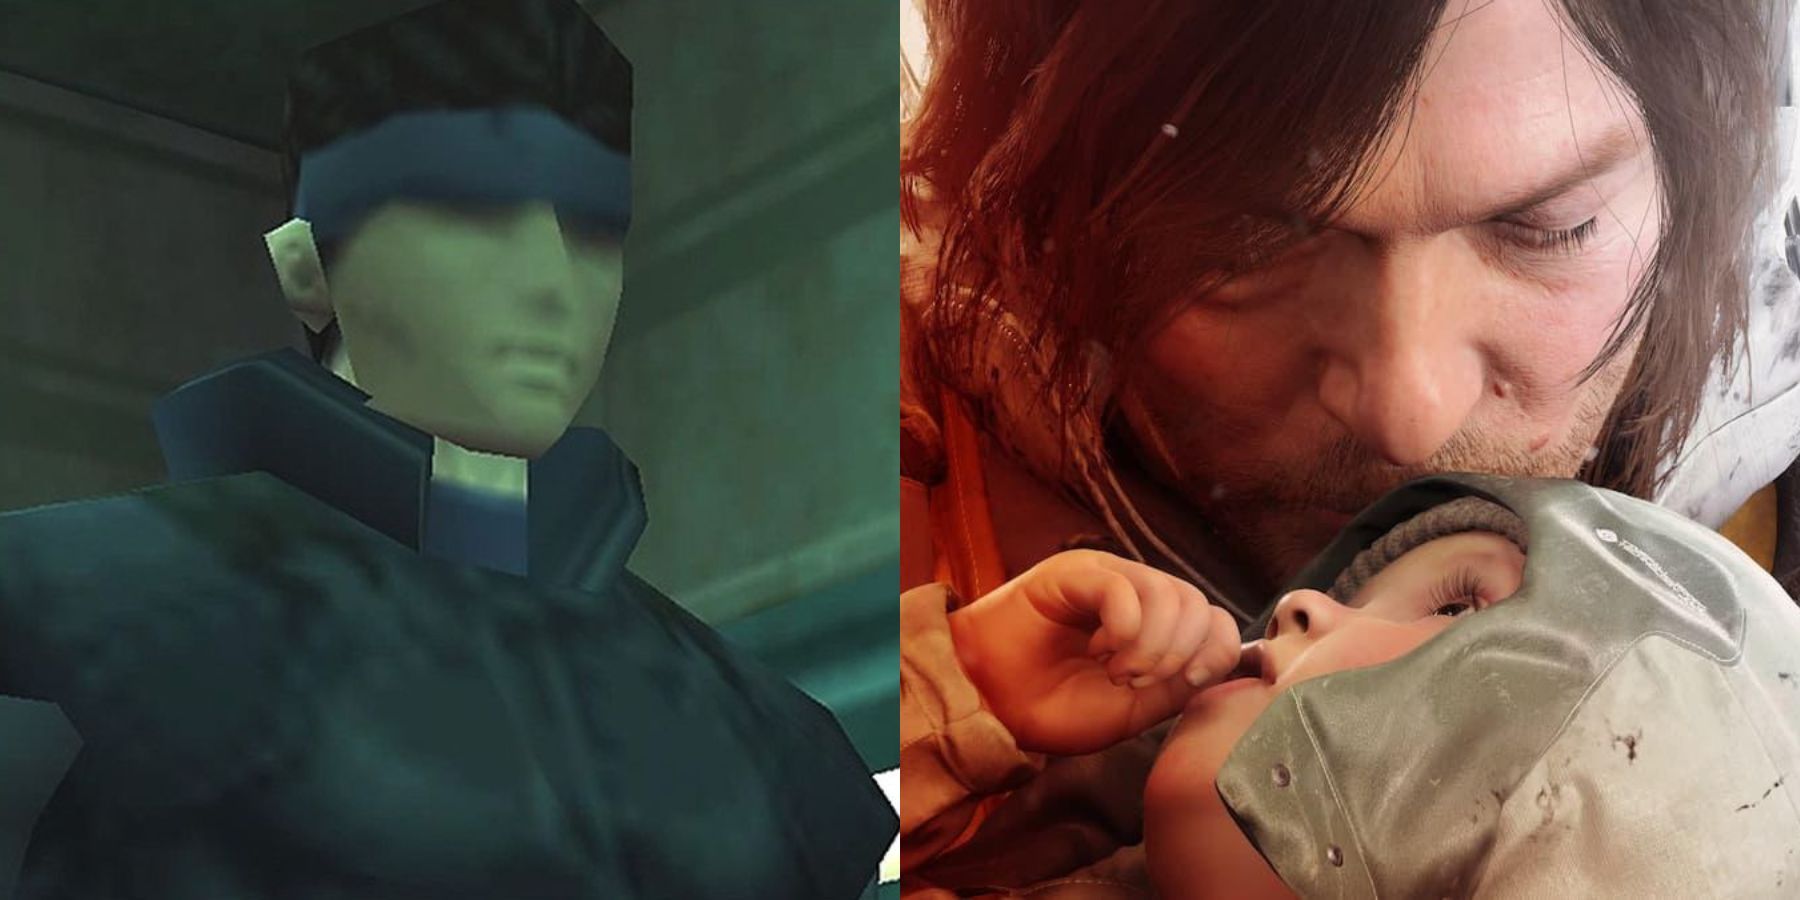 Sam from Death Stranding 2 and Snake from Metal Gear Solid